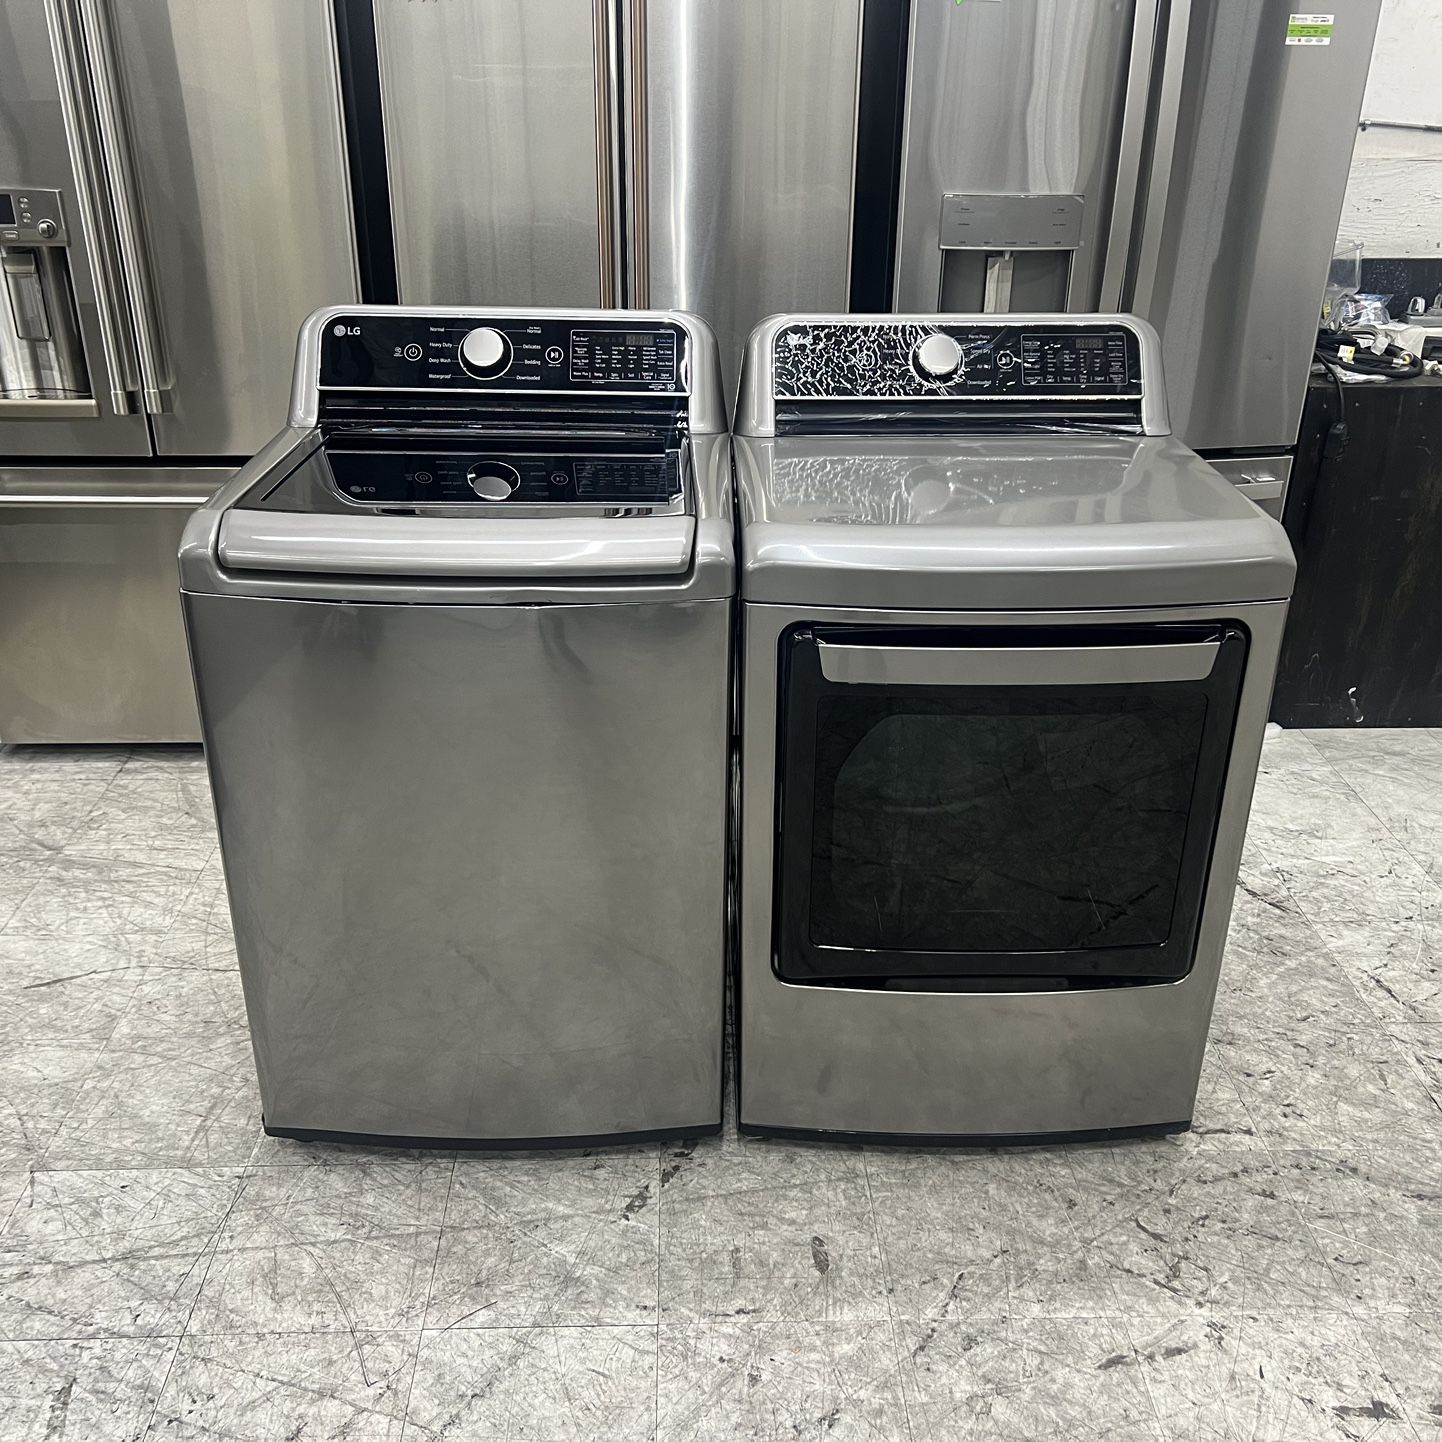 LG 5.5 smart top load washer and electric dryer in graphite